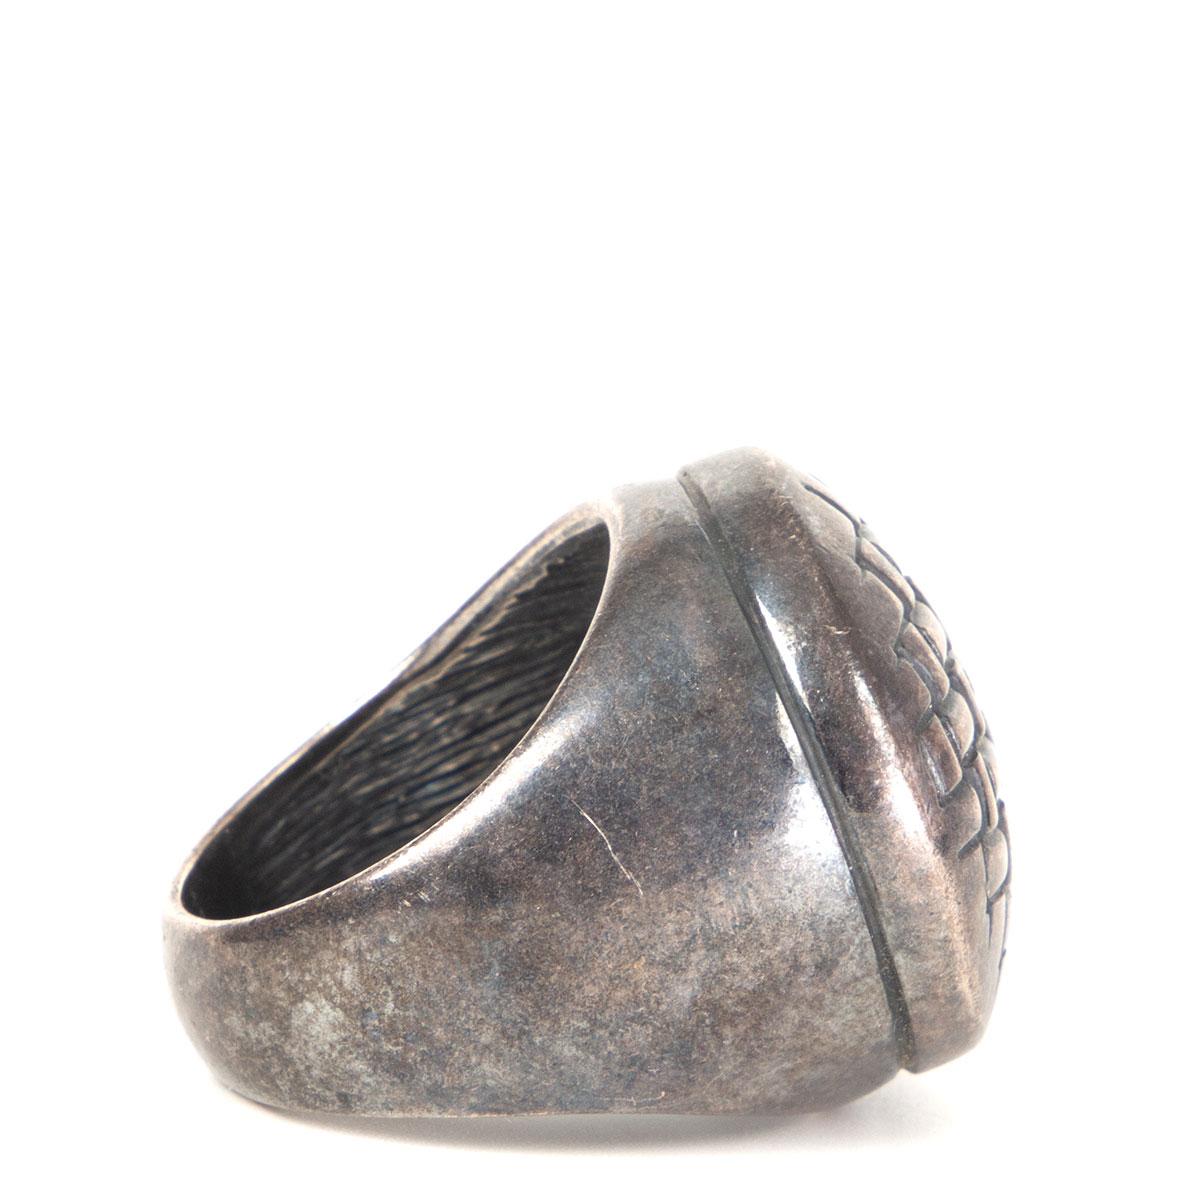 Bottega Veneta Intrecciato chuncky signet ring in antique silver. Has been worn and is in excellent condition. 

Tag Size 9.5
Width 2.5cm (1in)
Length 2.5cm (1in)
